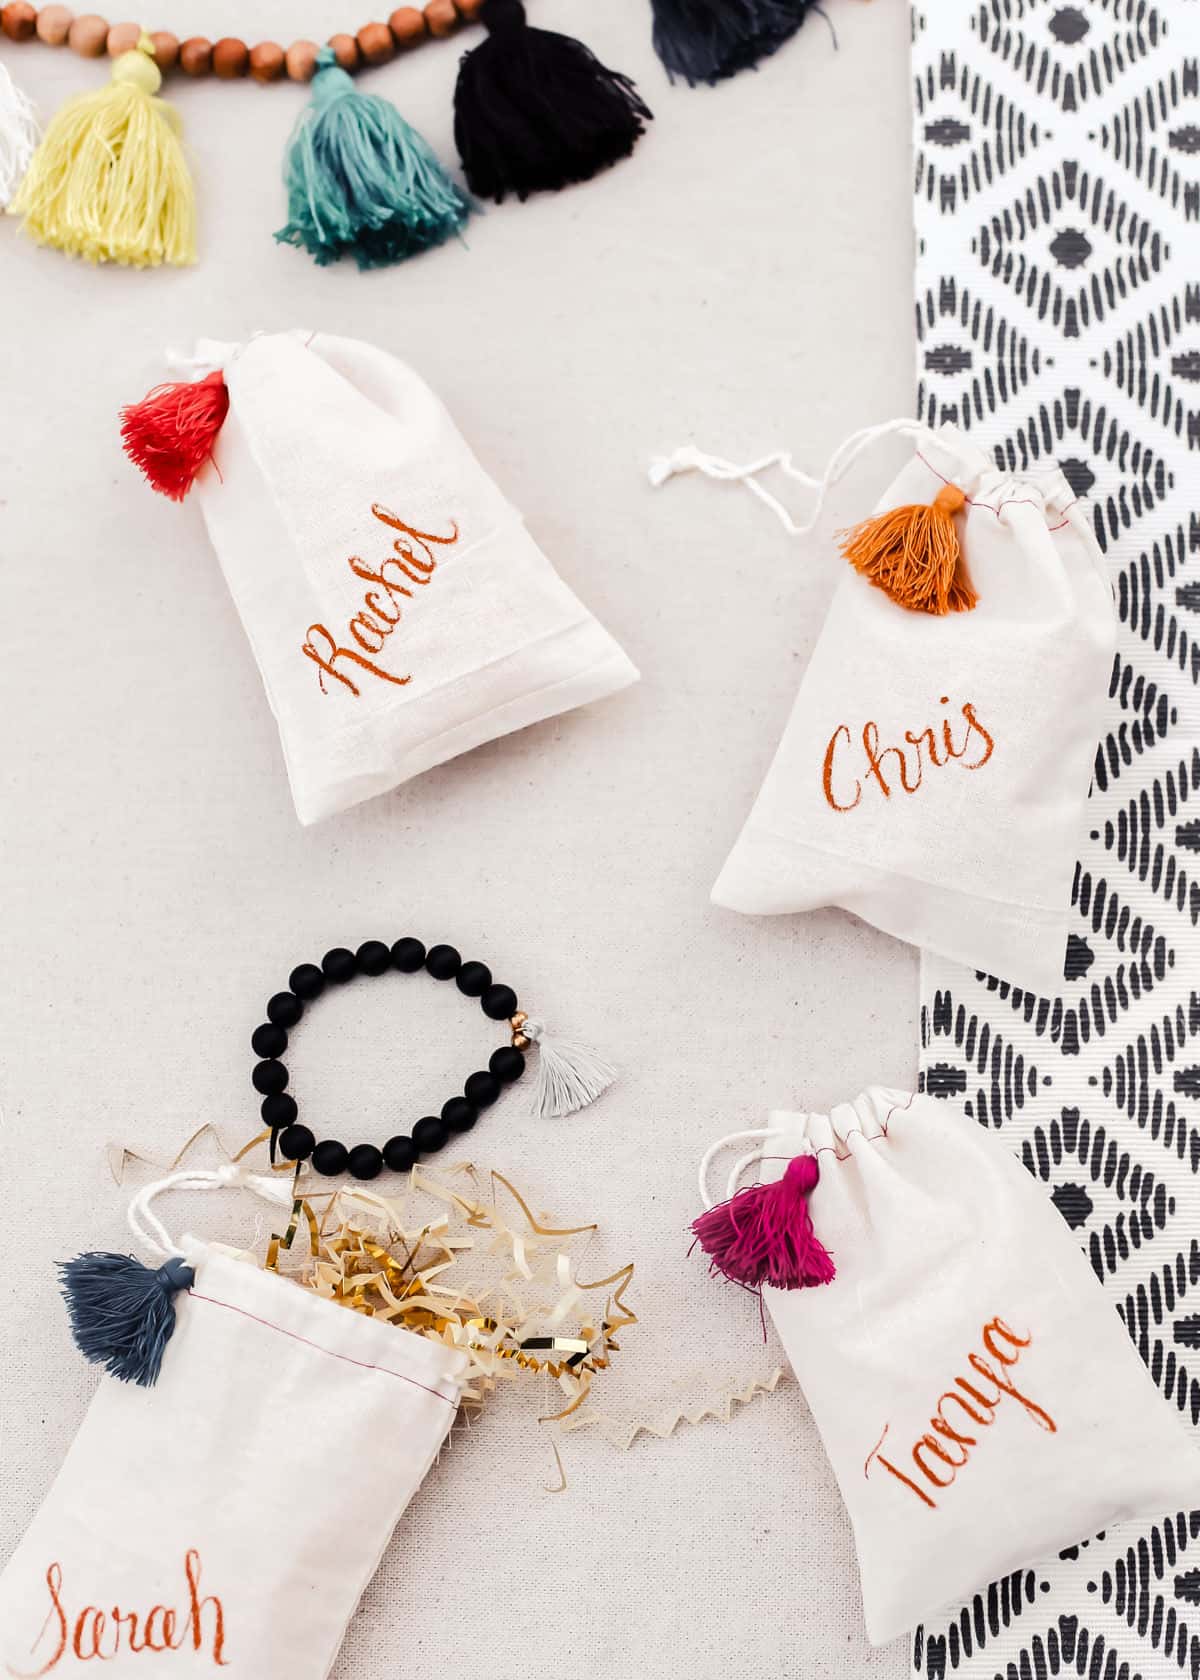 party favor muslin drawstring bags with names written on each and tassel detail.